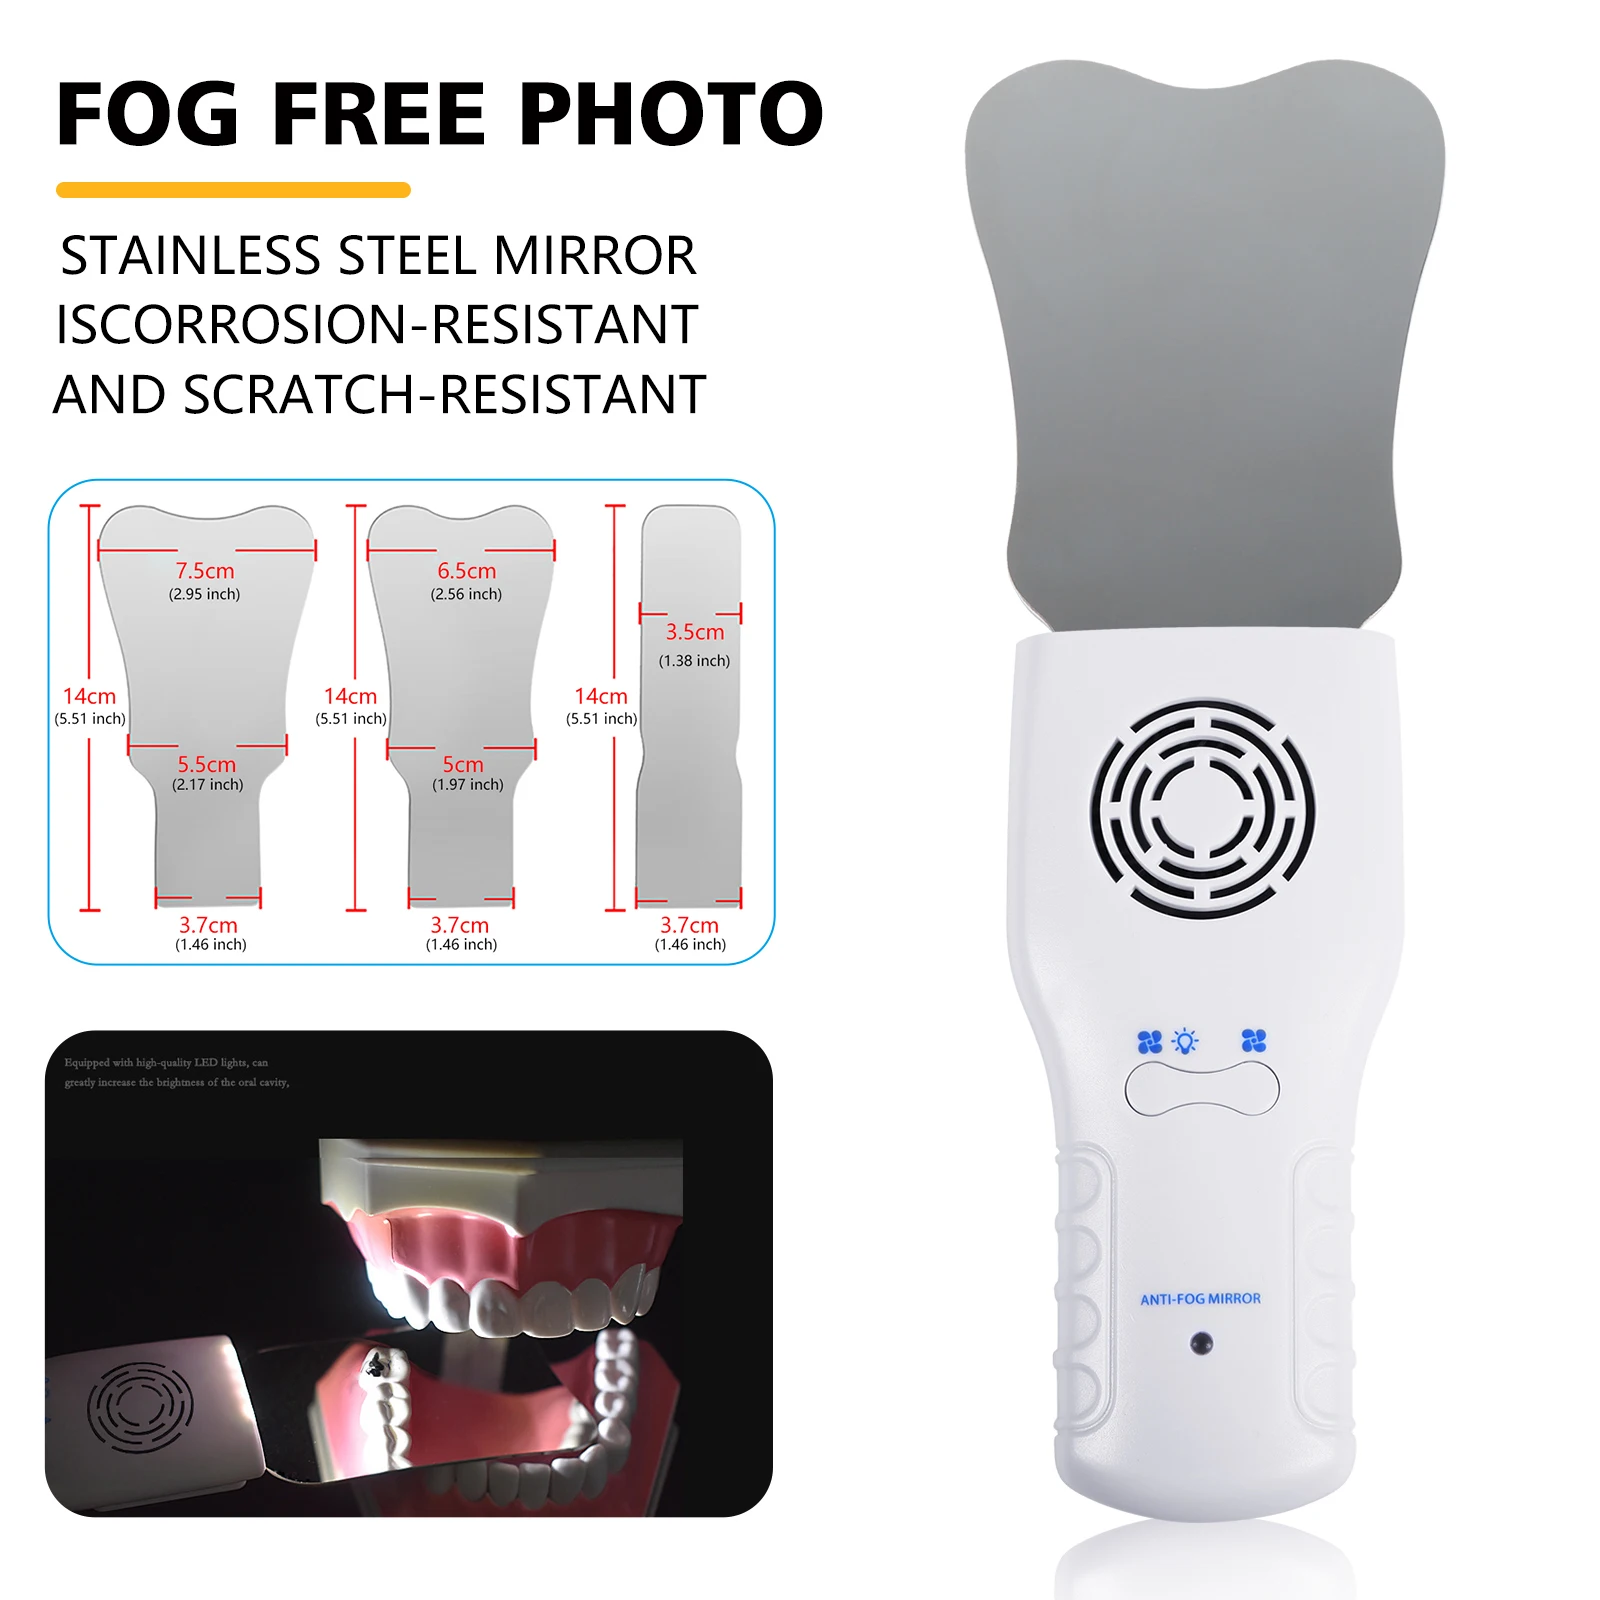 USB Charge Dental Stainless Steel Orthodontic Glass Photo Photography Dental Anti-fog Imaging Reflector Oral Mirror With Light